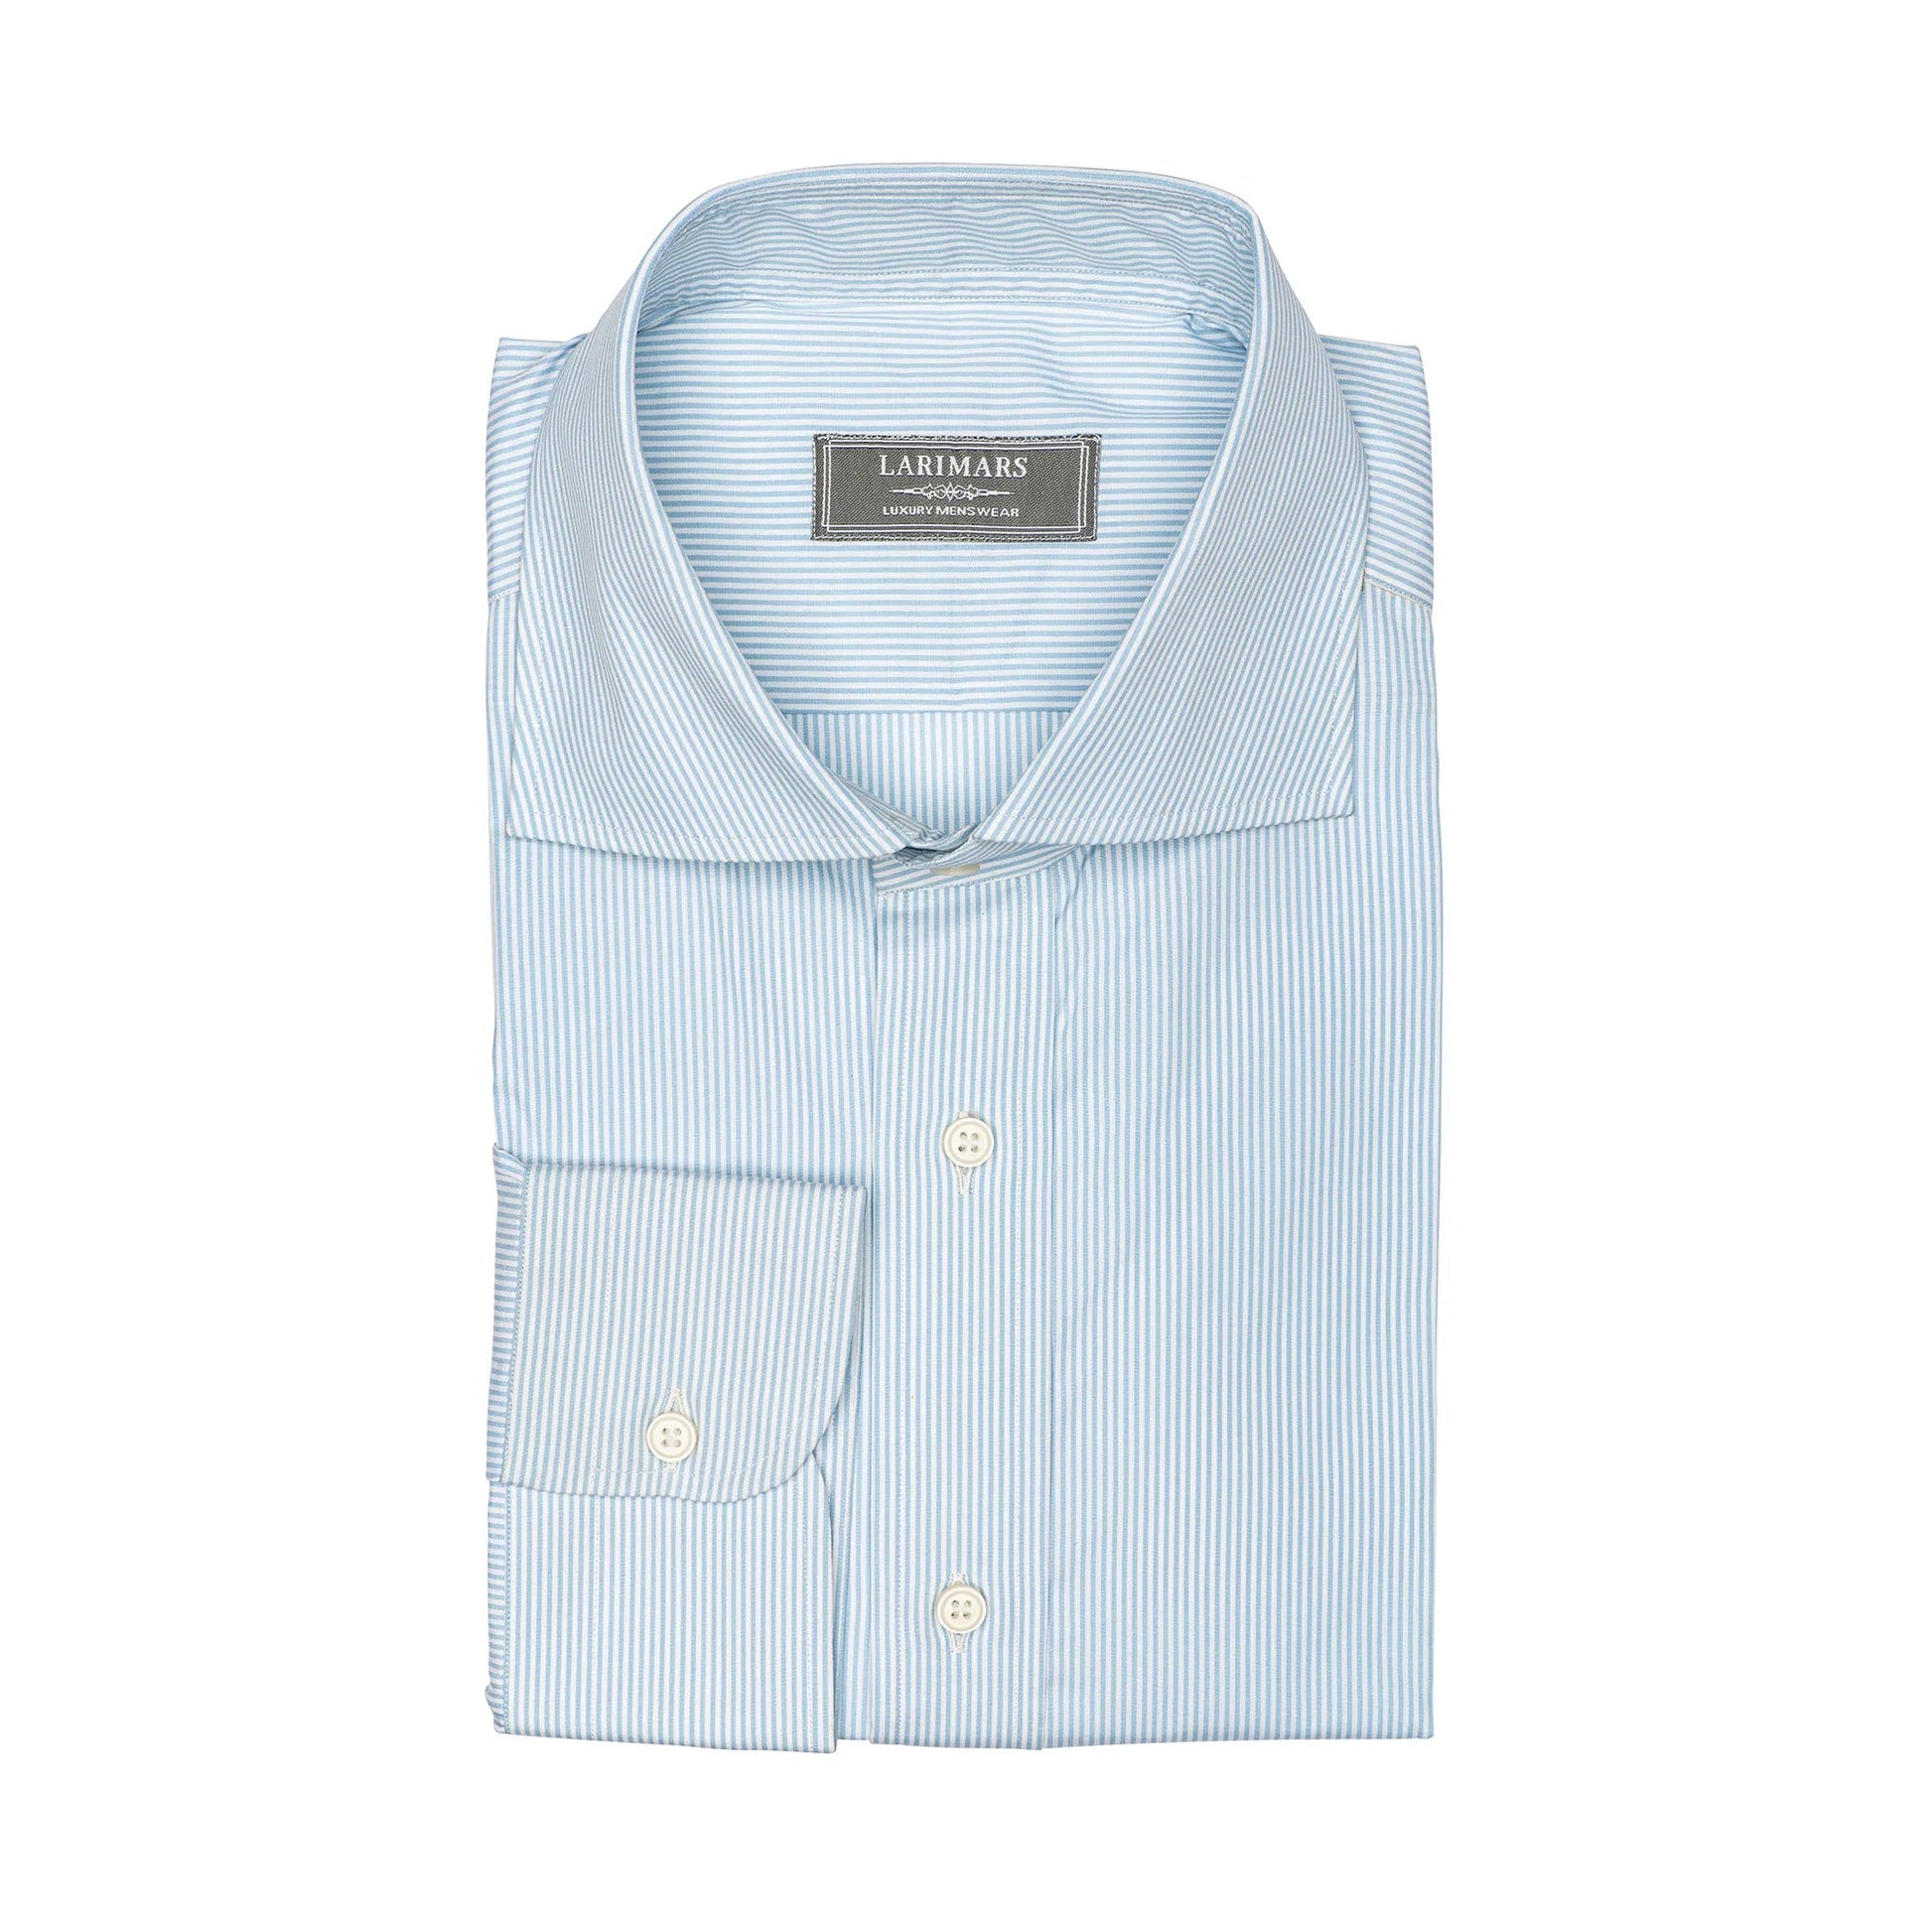 Light Blue Stripe - Larimars Clothing Men's Formal and casual wear shirts